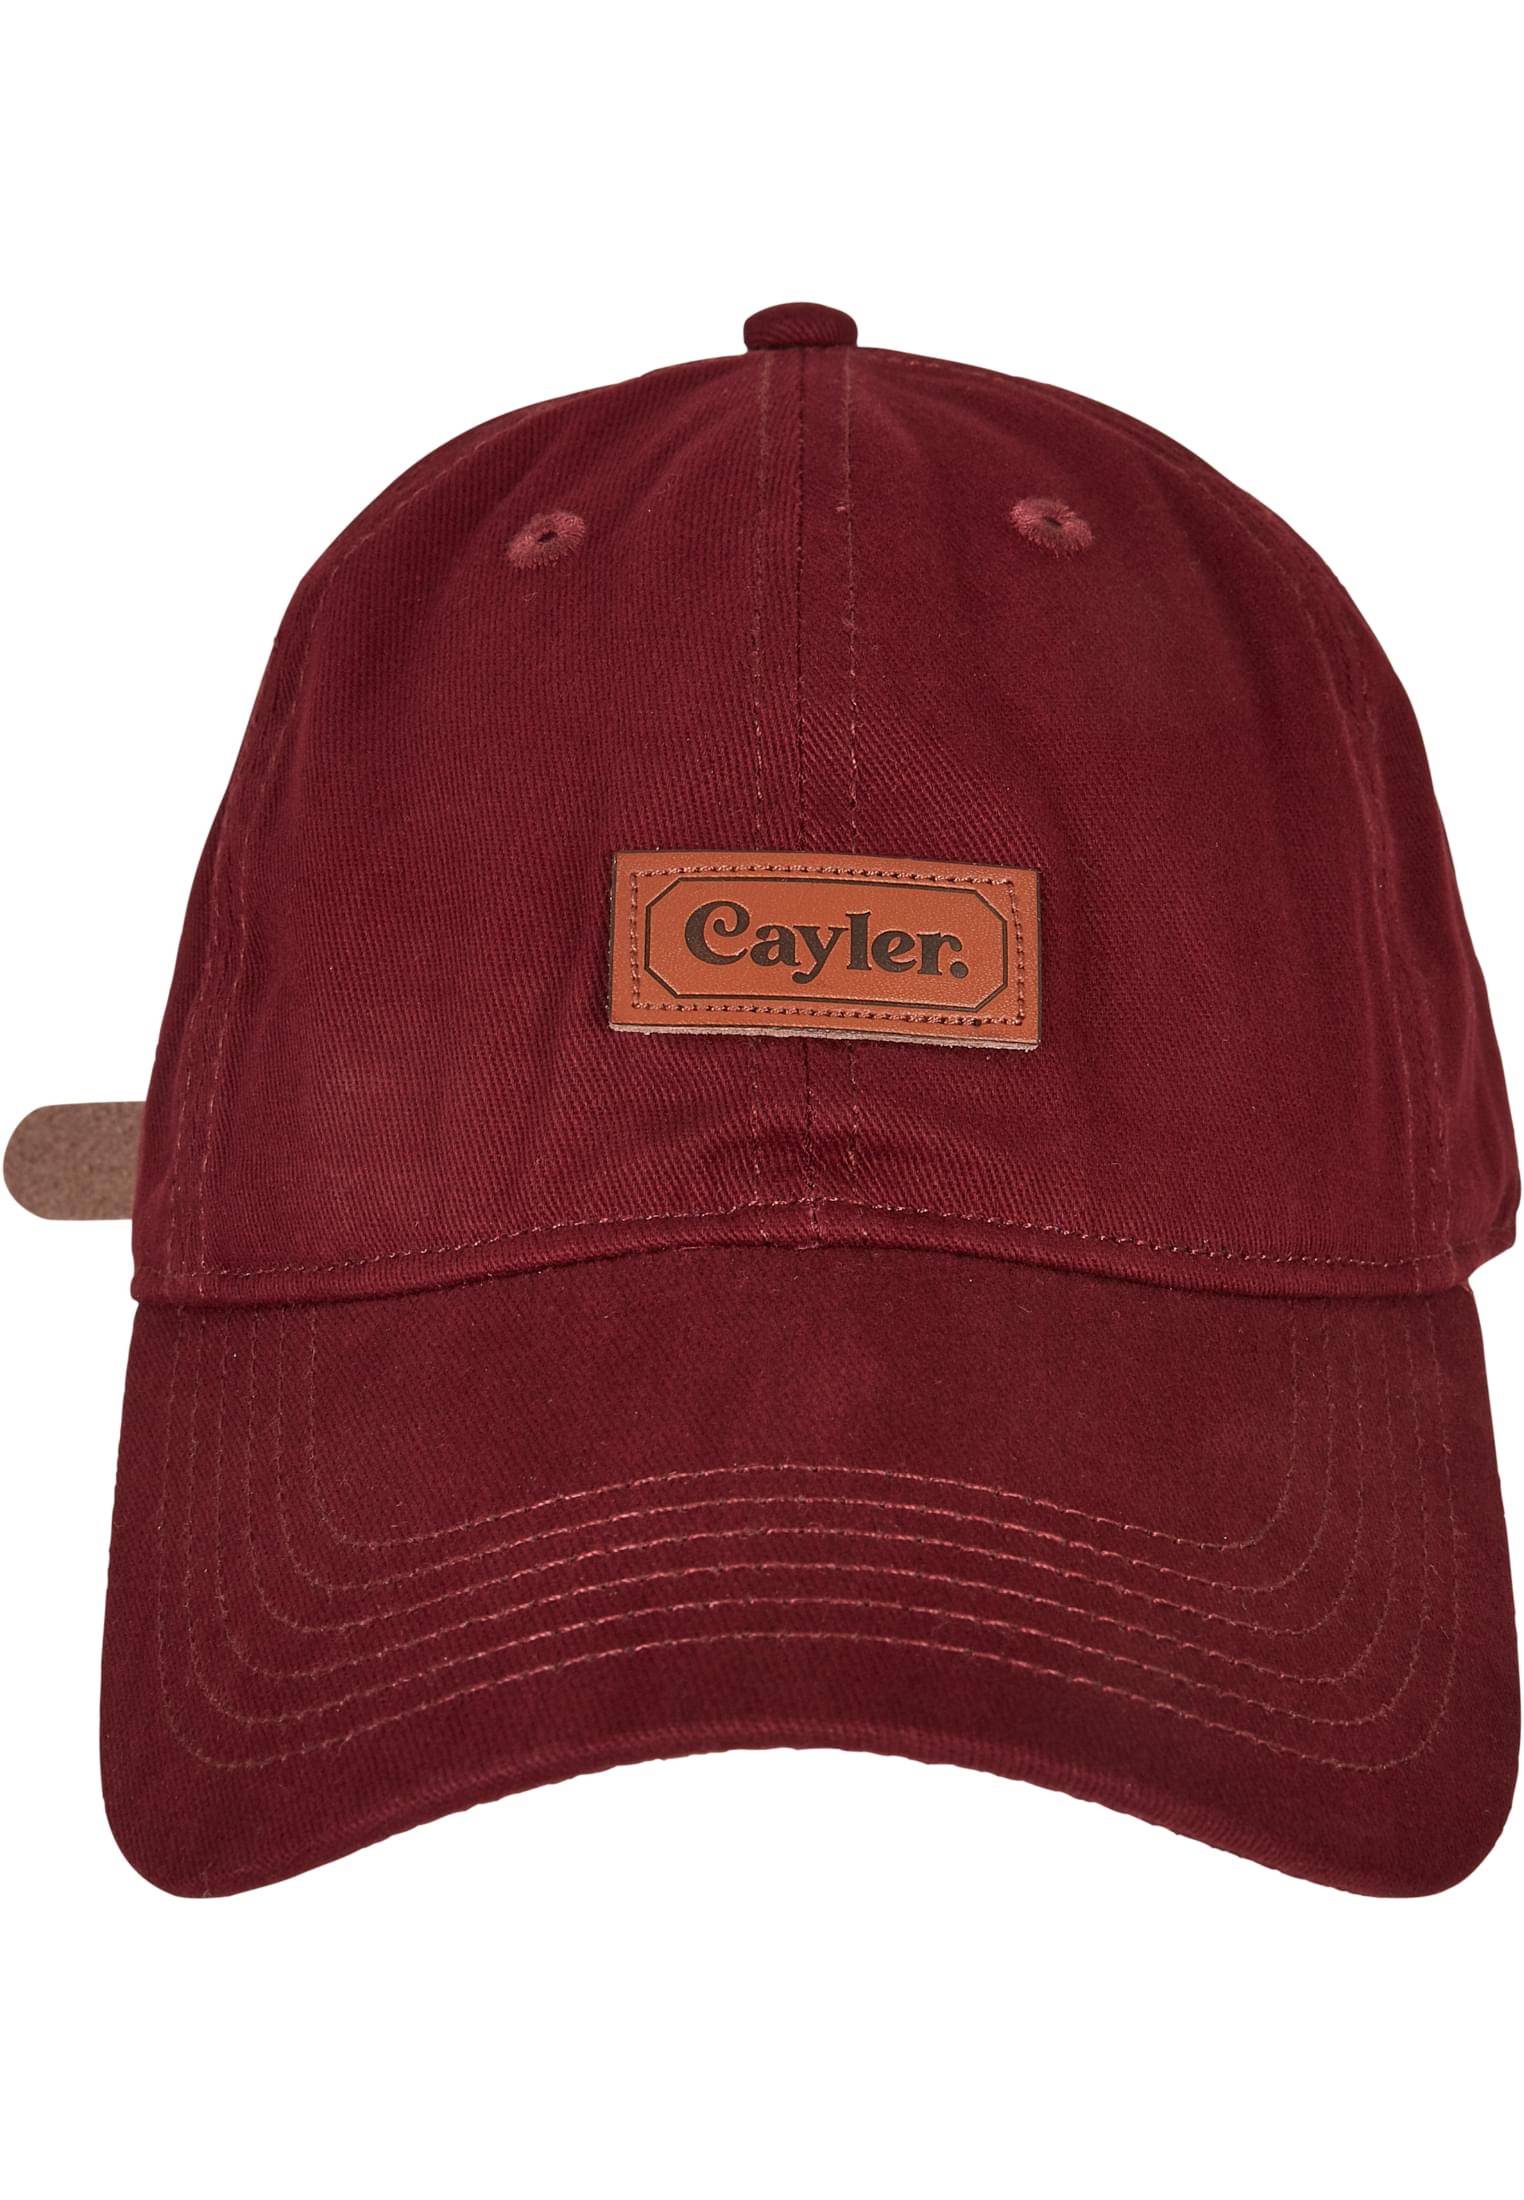 Бейсболка Cayler & Sons Cayler & Sons Accessoires Classy Patch Curved, бордо